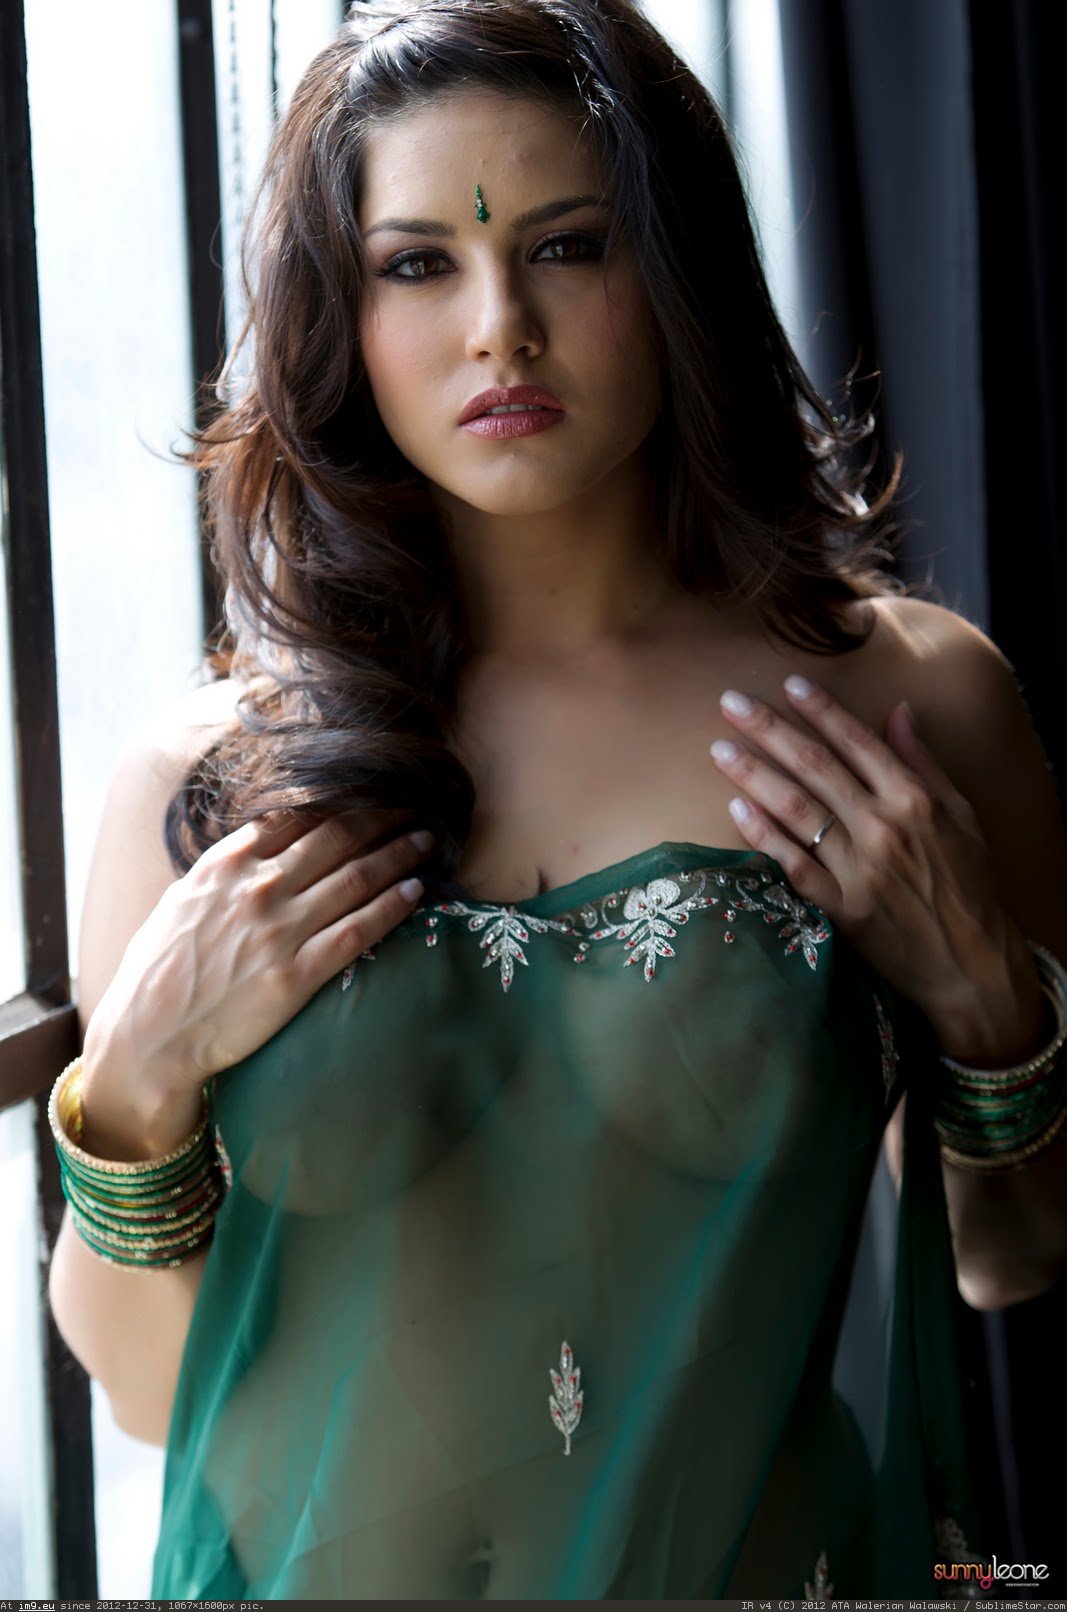 Sunny Leone 2 album (page 6 of 7, full images gallery)